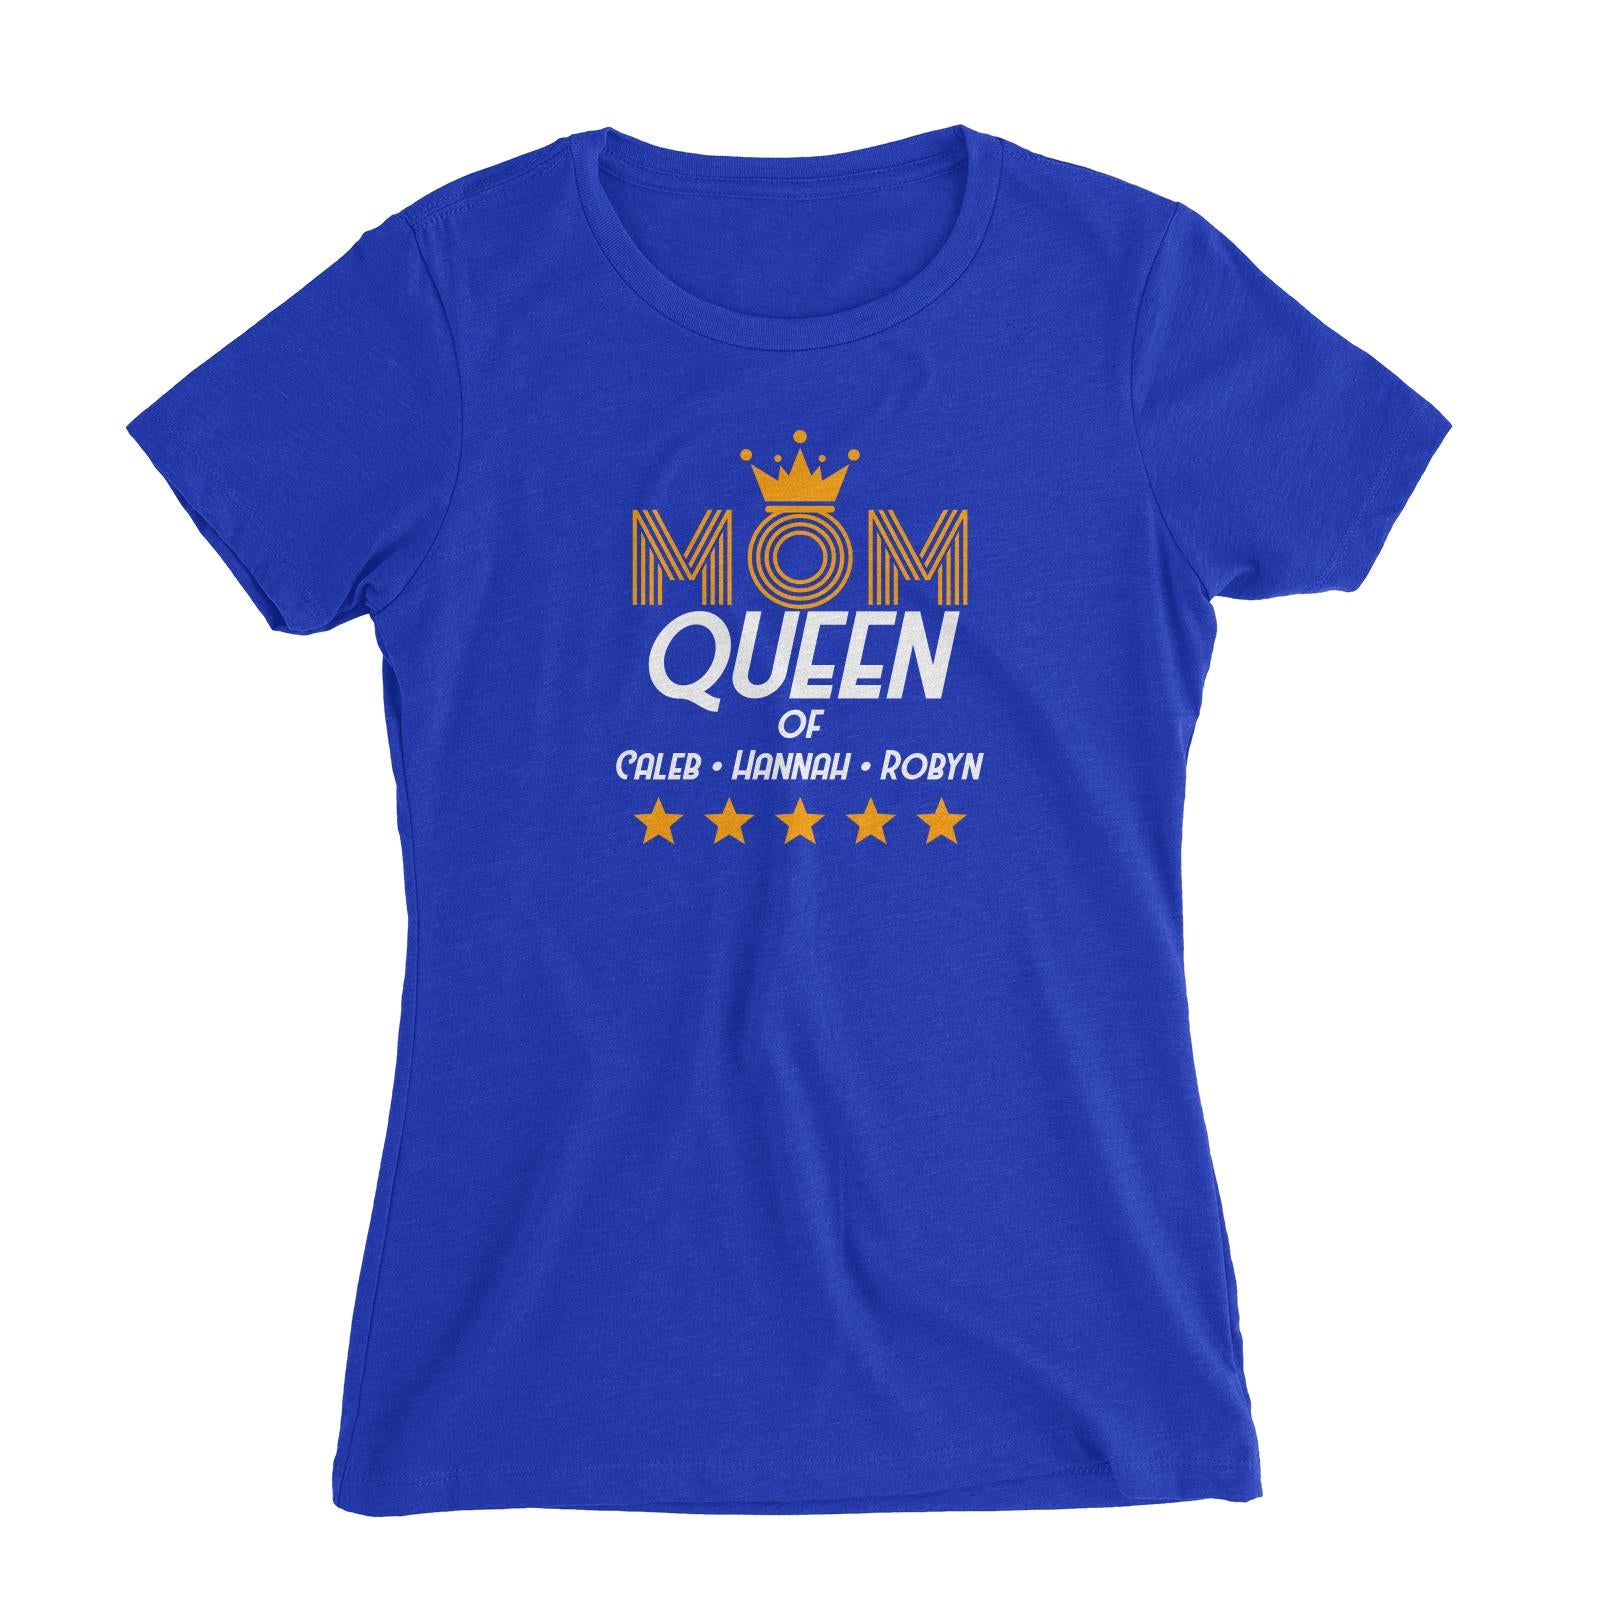 Mom with Tiara Queen of Personalizable with Text Women's Slim Fit T-Shirt